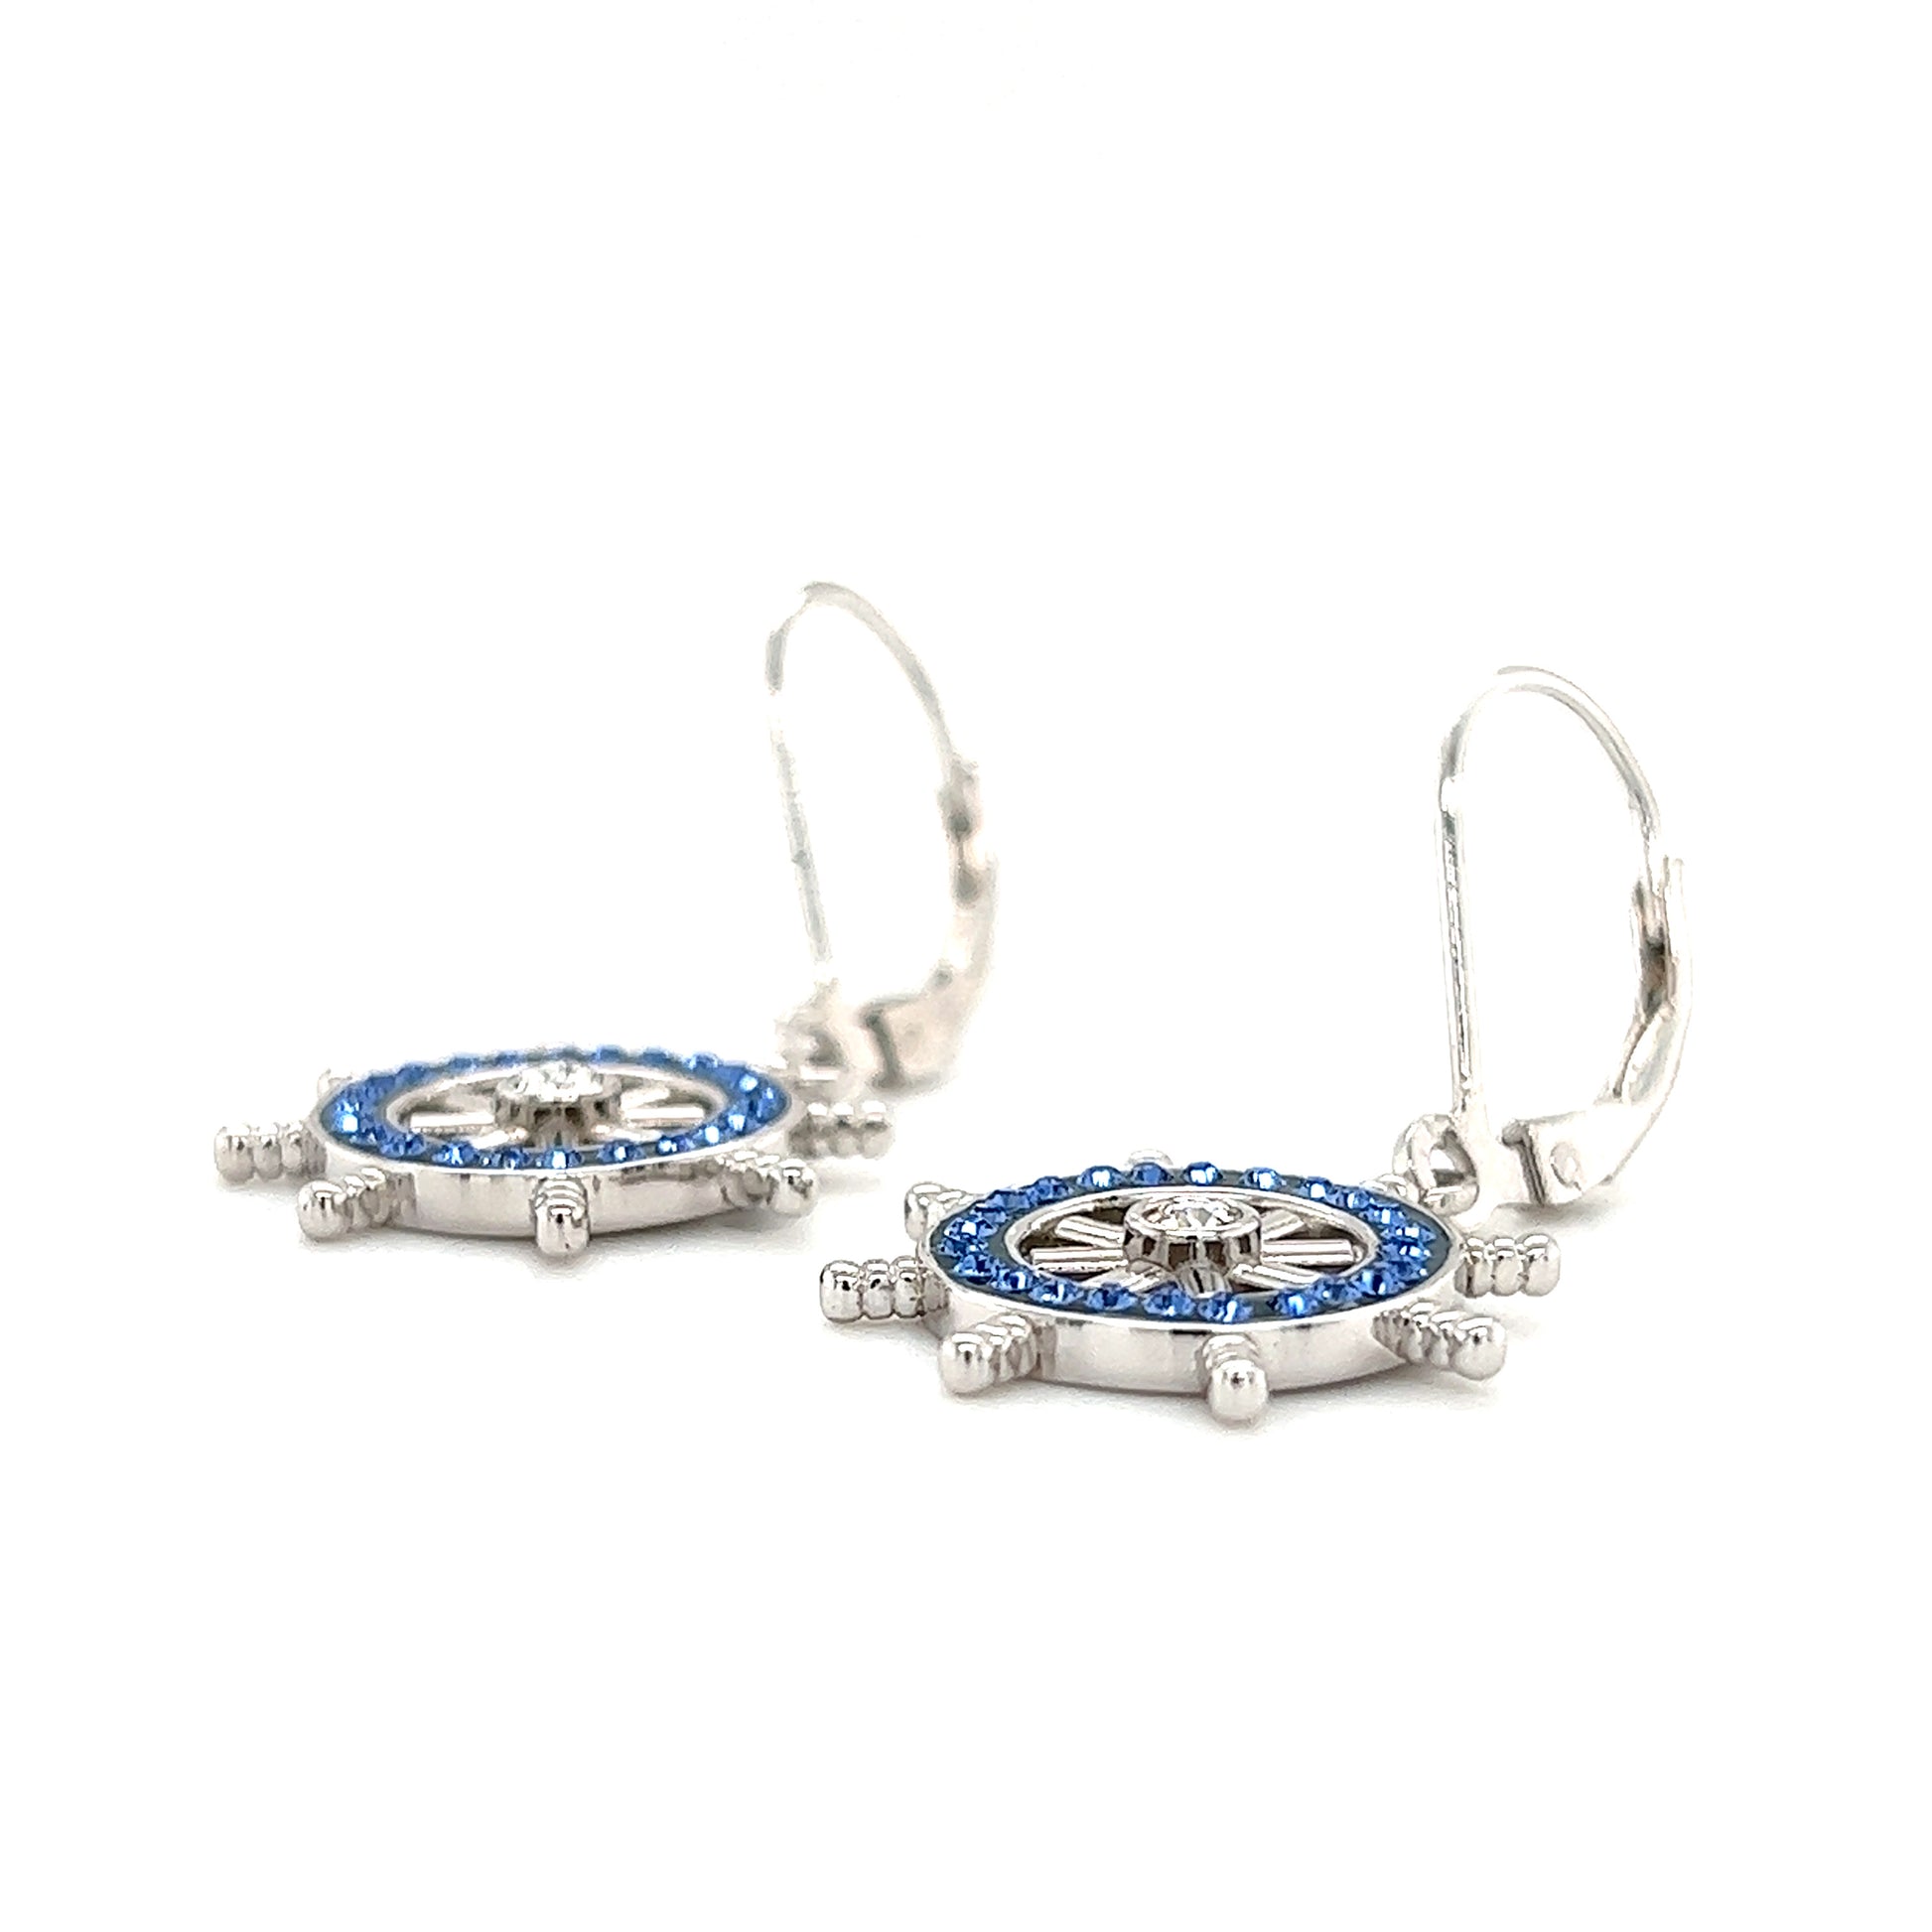 Ship's Wheel Dangle Earrings with Crystals in Sterling Silver Right Side View